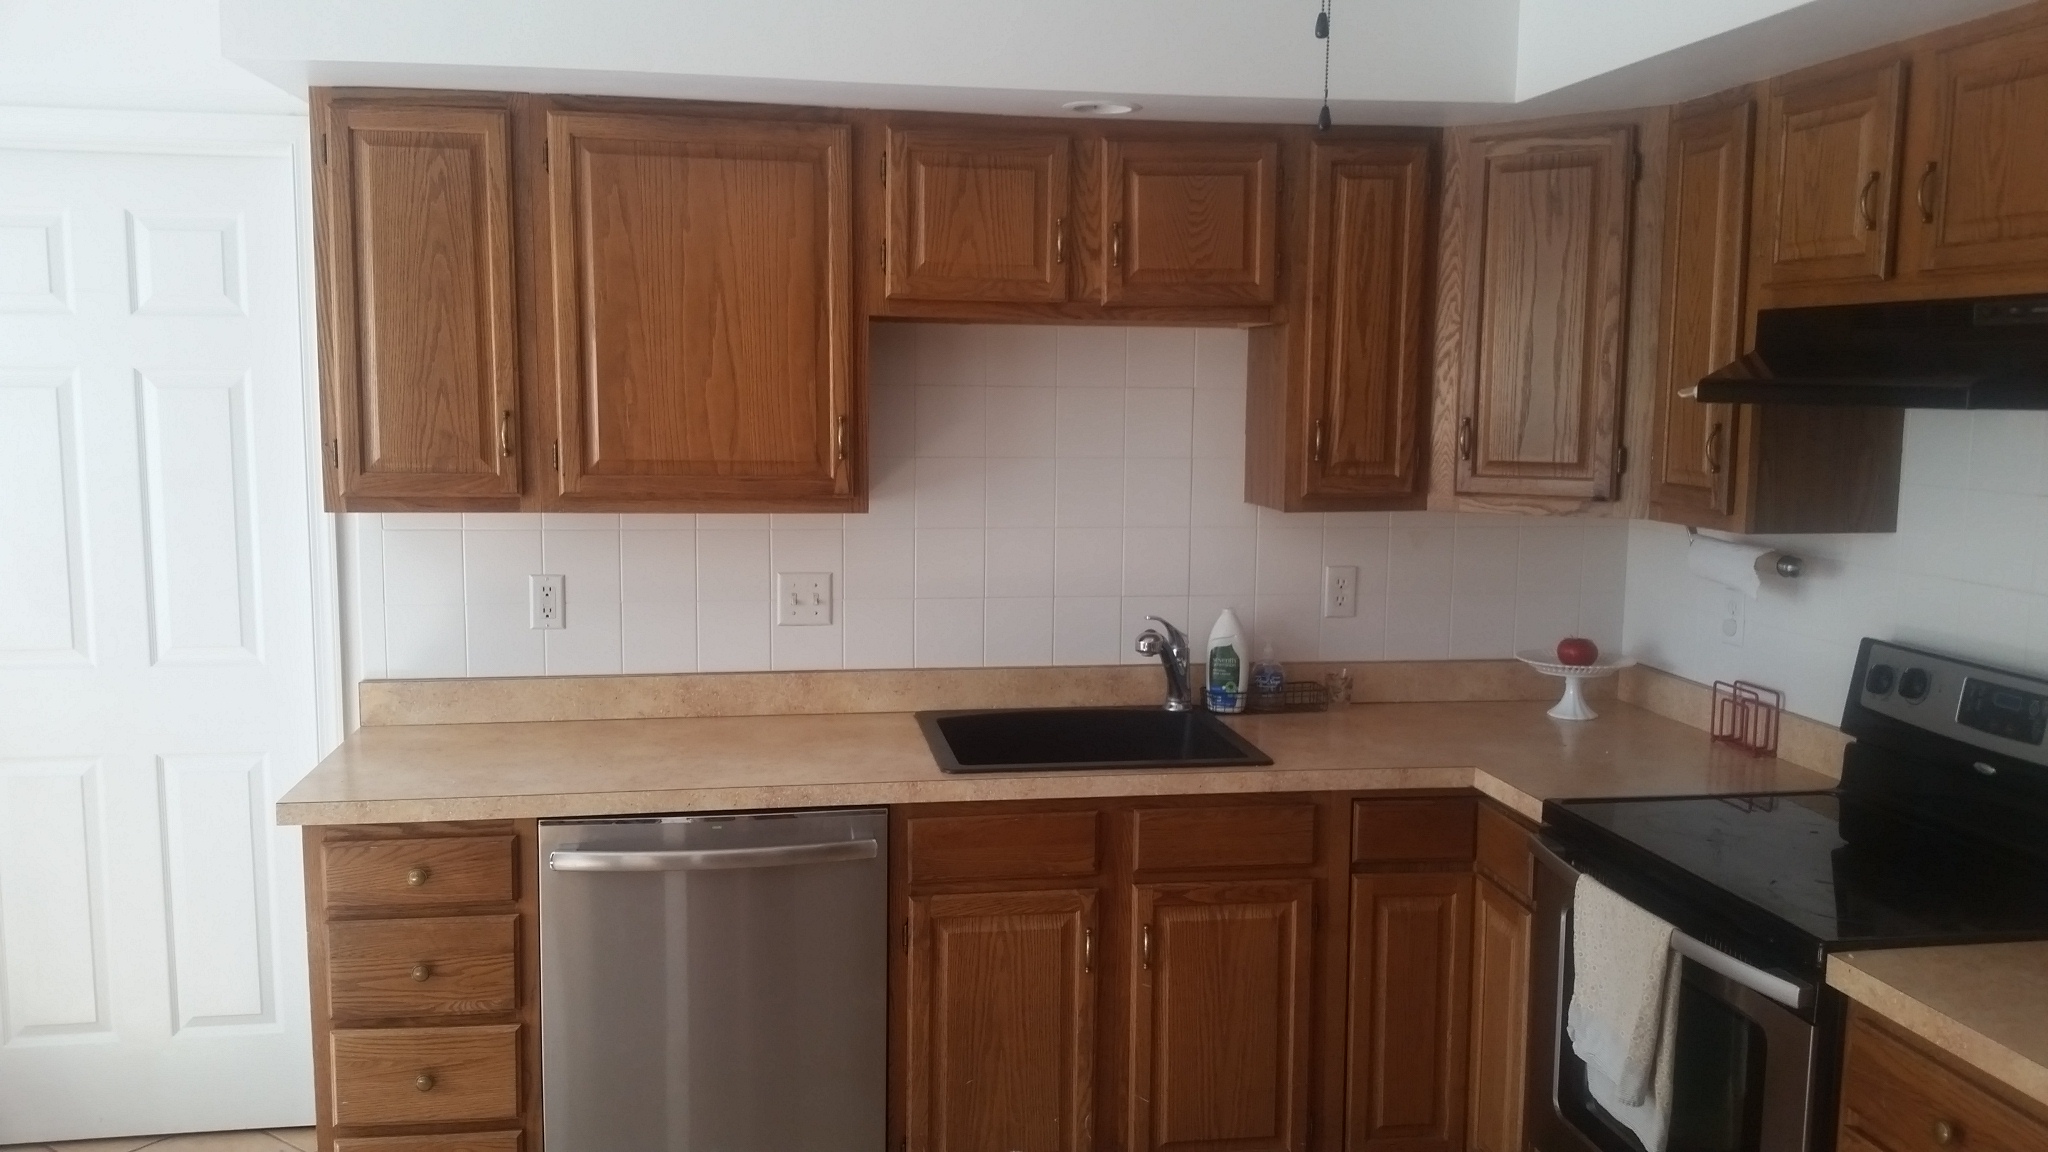 DIY kitchen reno before and after